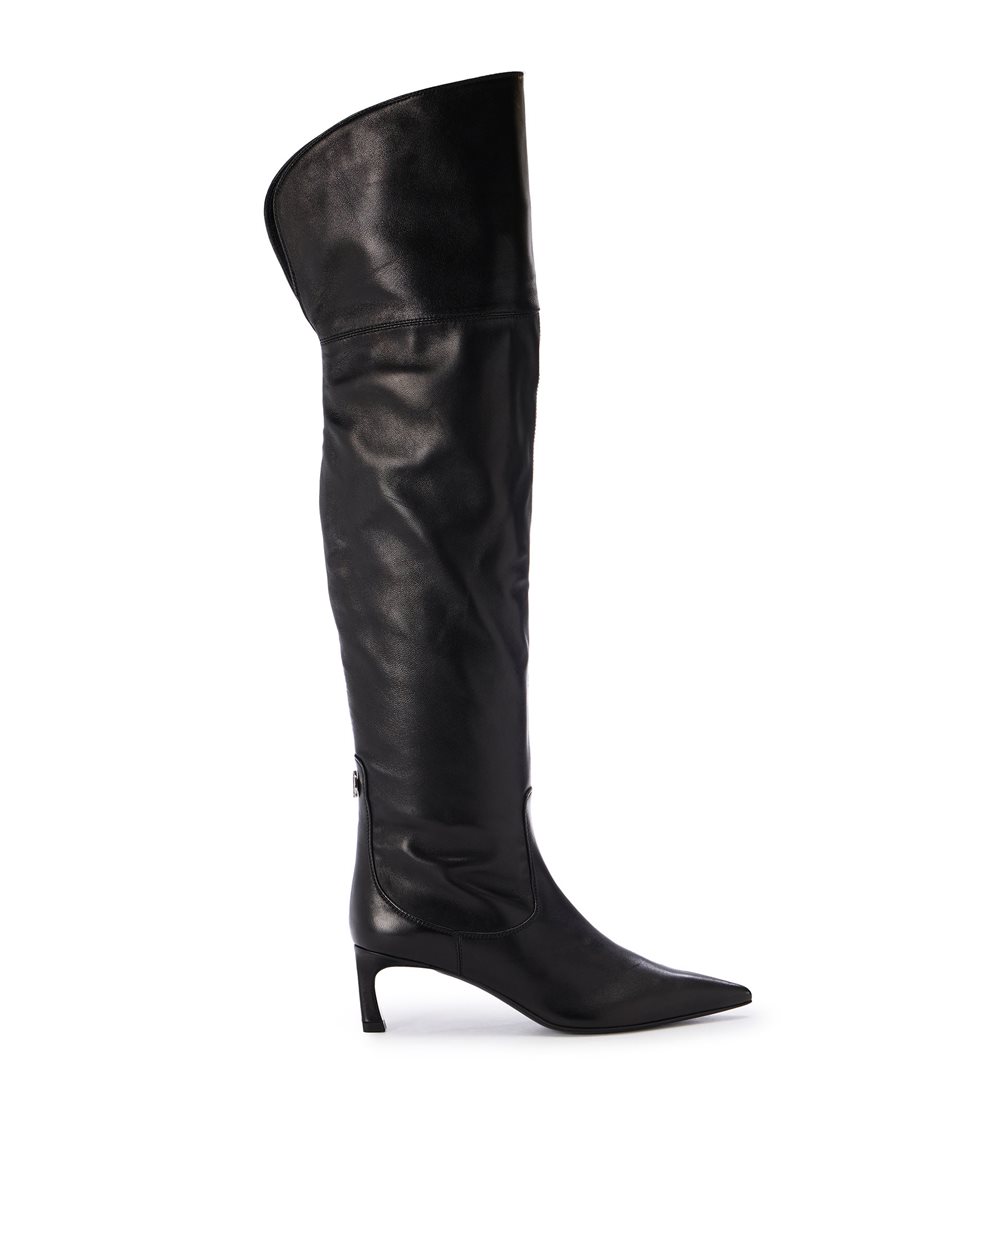 Black leather thigh-high boots - carosello HP woman accessories | Iceberg - Official Website